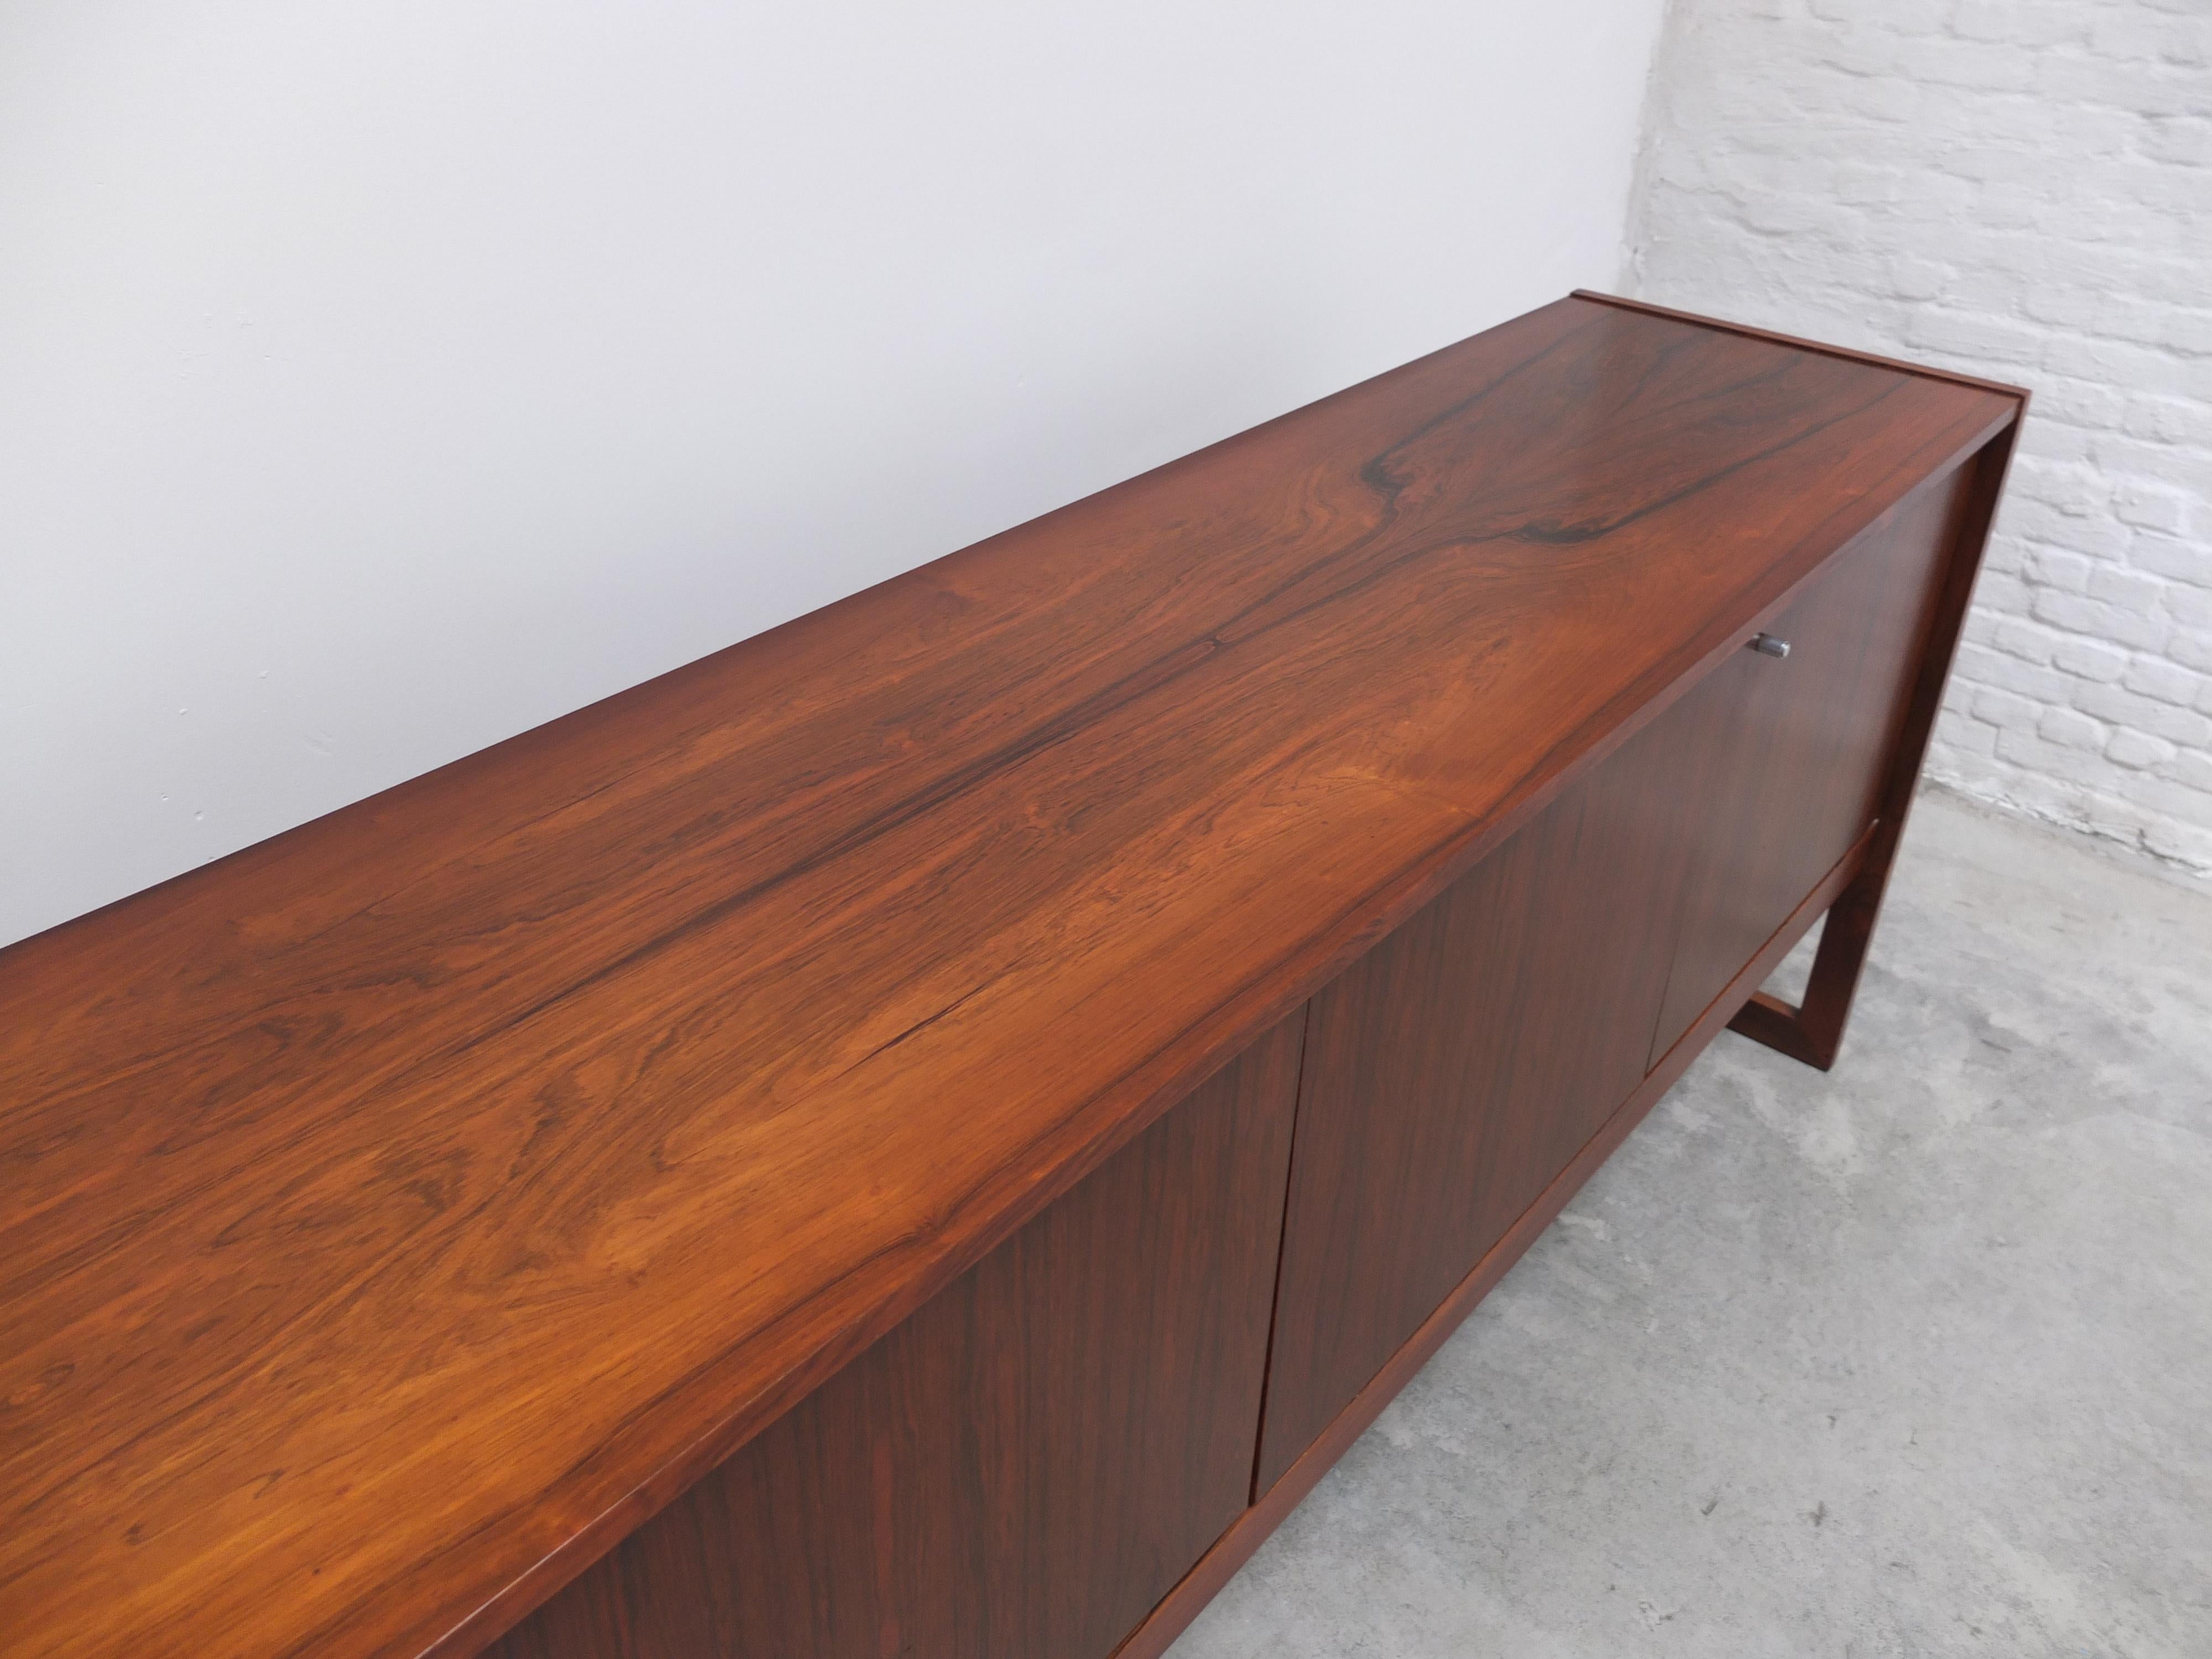 Large Exclusive 'Tecton' Sideboard by V-Form, 1960s For Sale 7